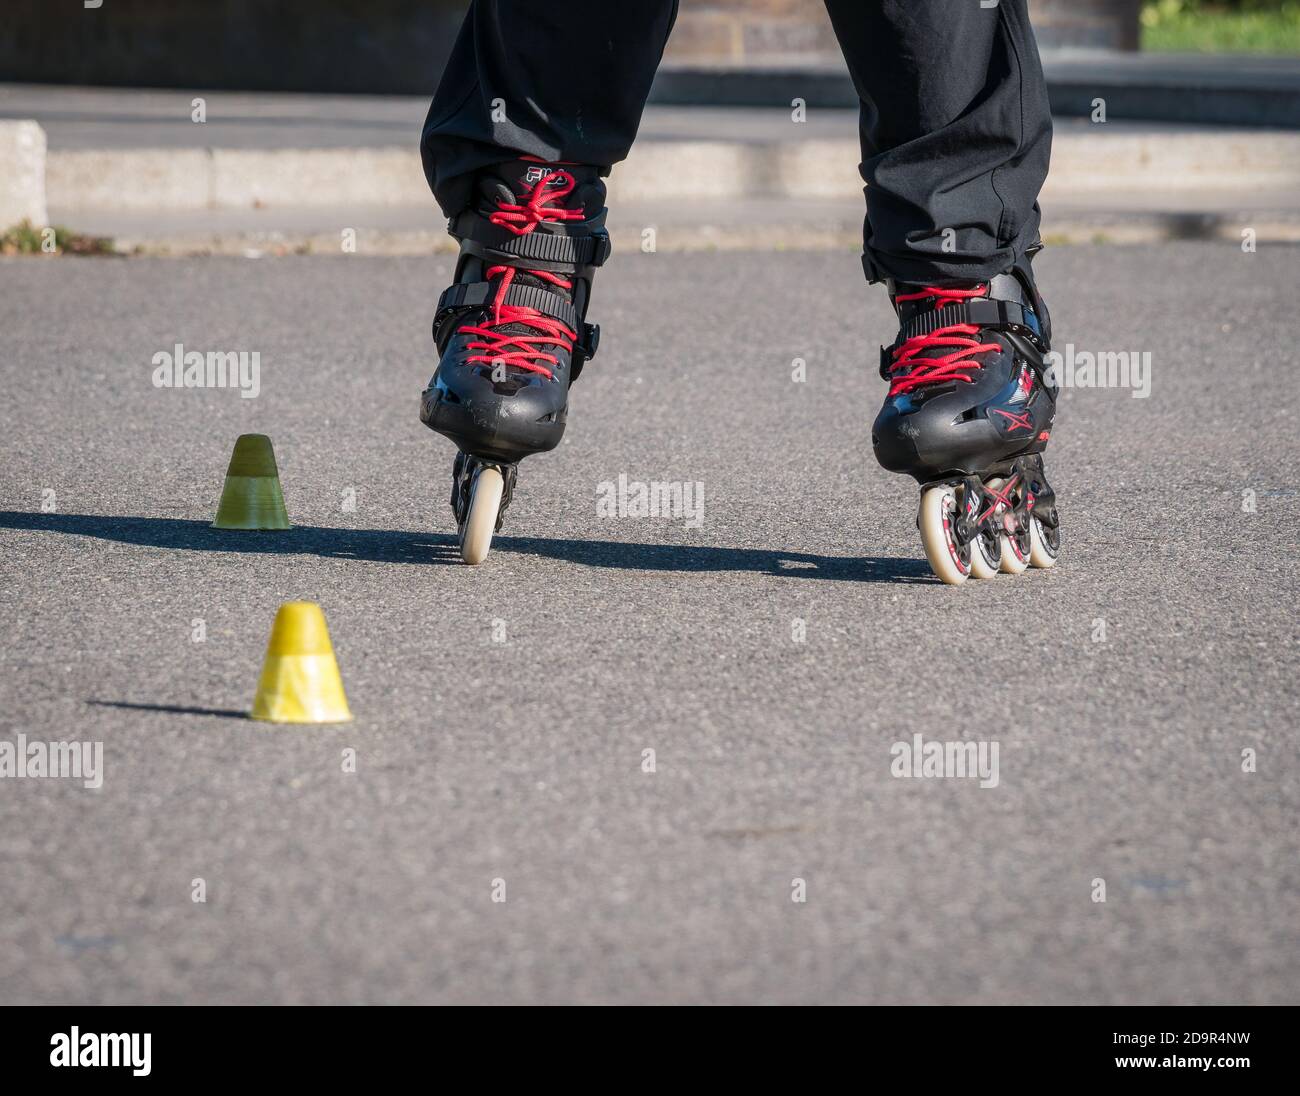 Bucharest/Romania - 10.17.2020: Man on rollerblades or Inline skates learning how to skate in the park. Stock Photo